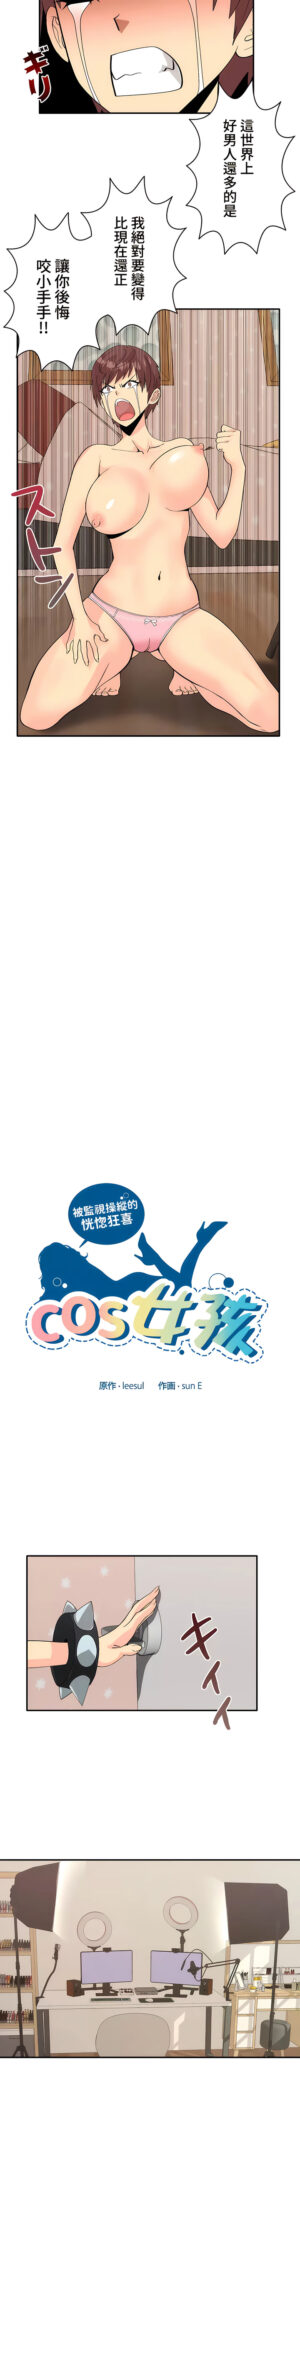 [leesul & sunE] COS女孩 1-35 END [Chinese]